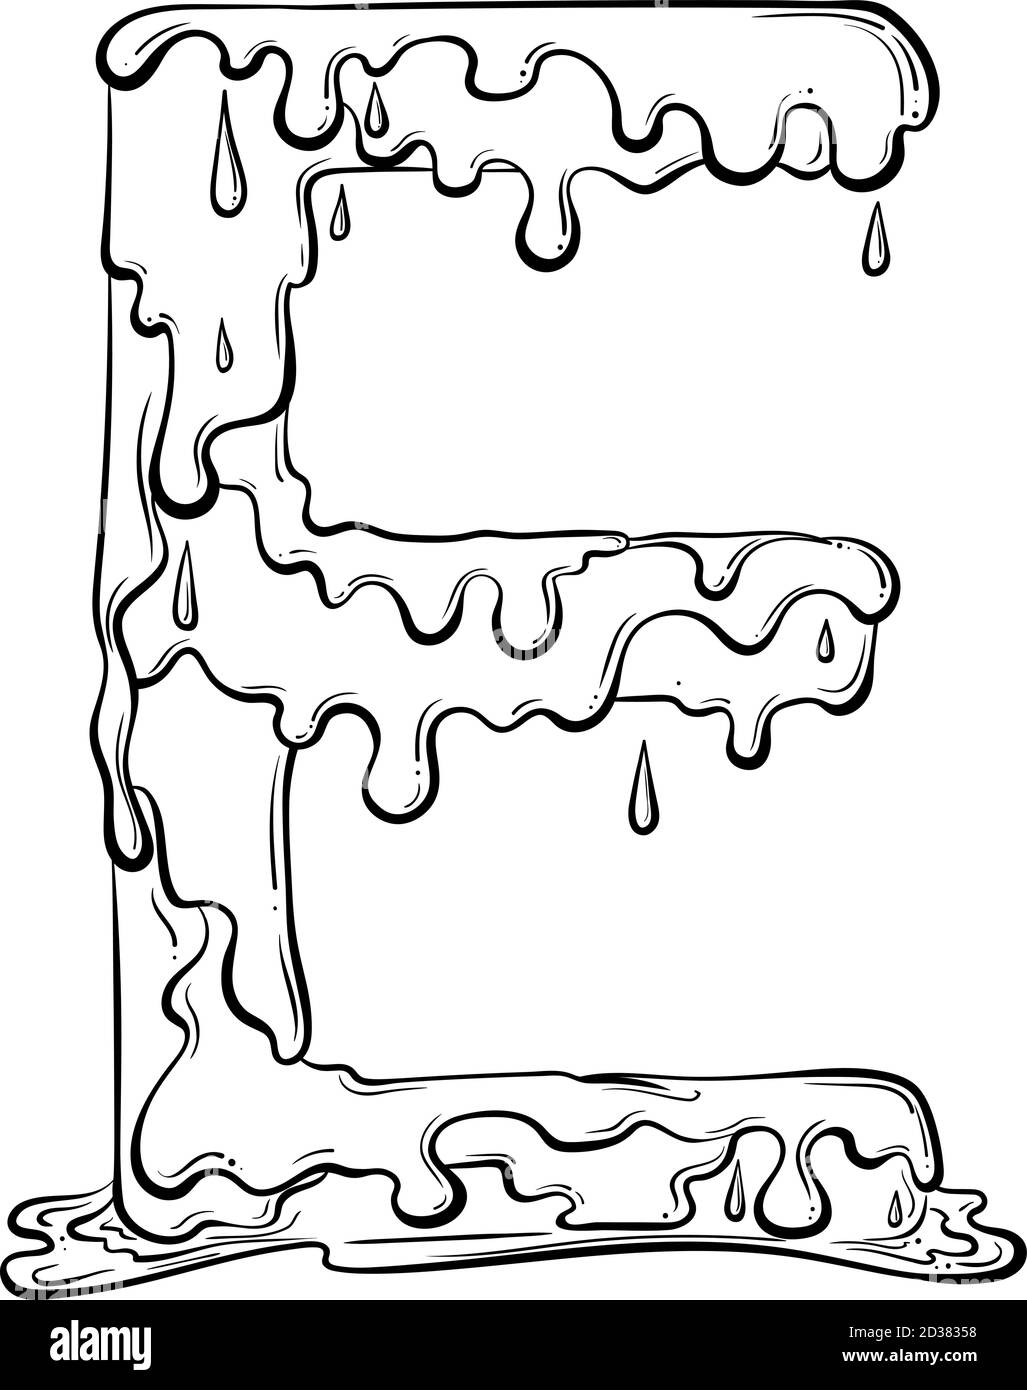 Lettering dripping word Slime. Vector illustration isolated on